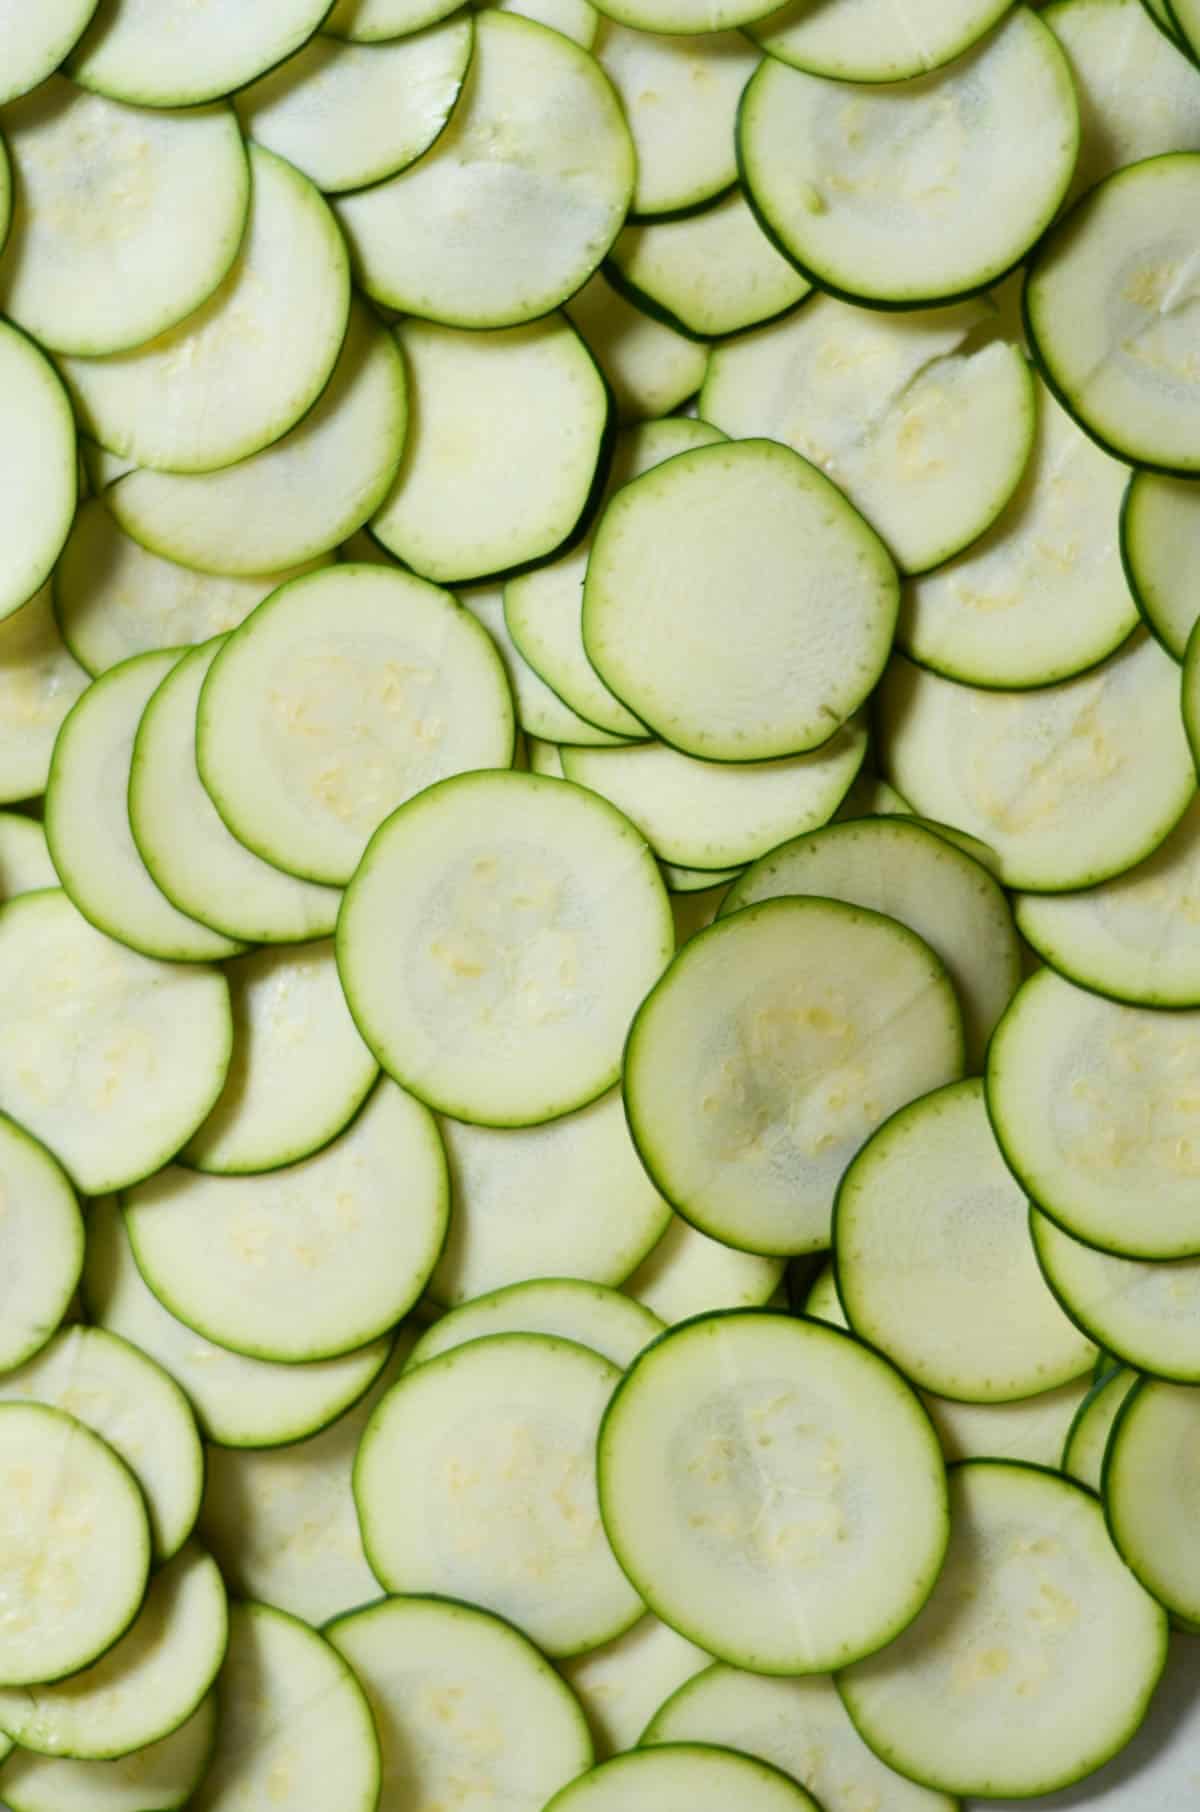 Green and white sliced zucchini round overlaying each other.